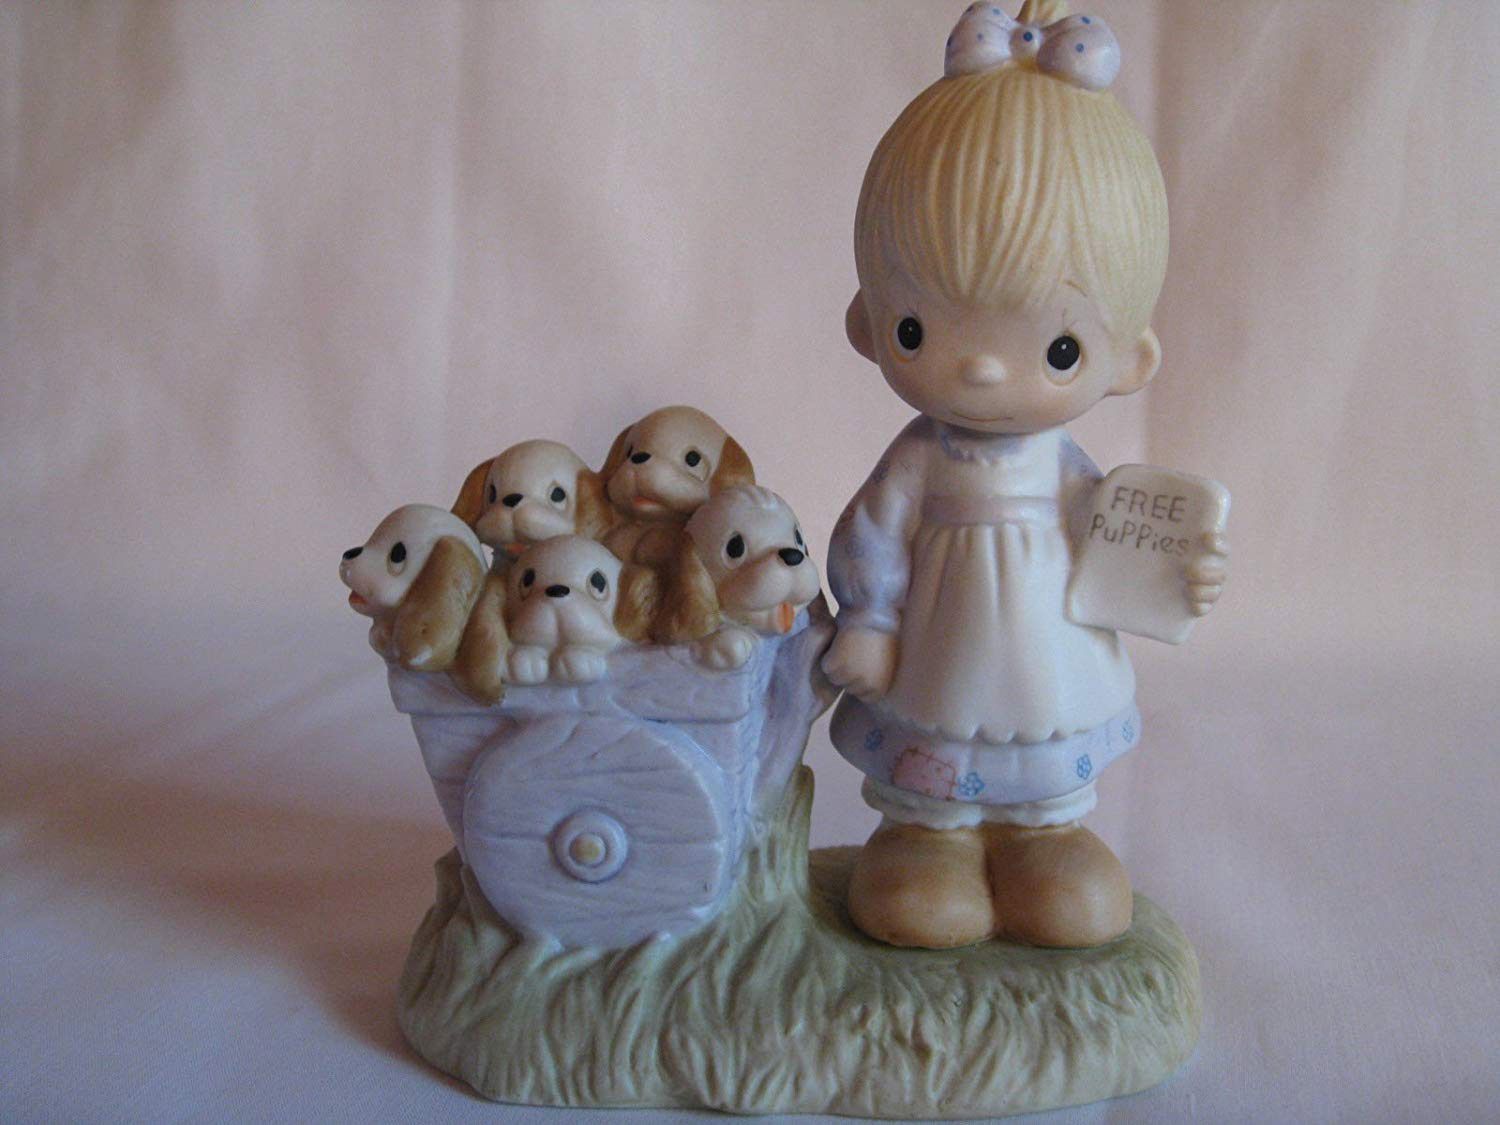 Vintage 80s 1983 Enesco Precious Moments You Have Touched So Many Hearts Porcelain Collectible Figurine with Original Box Paperwork